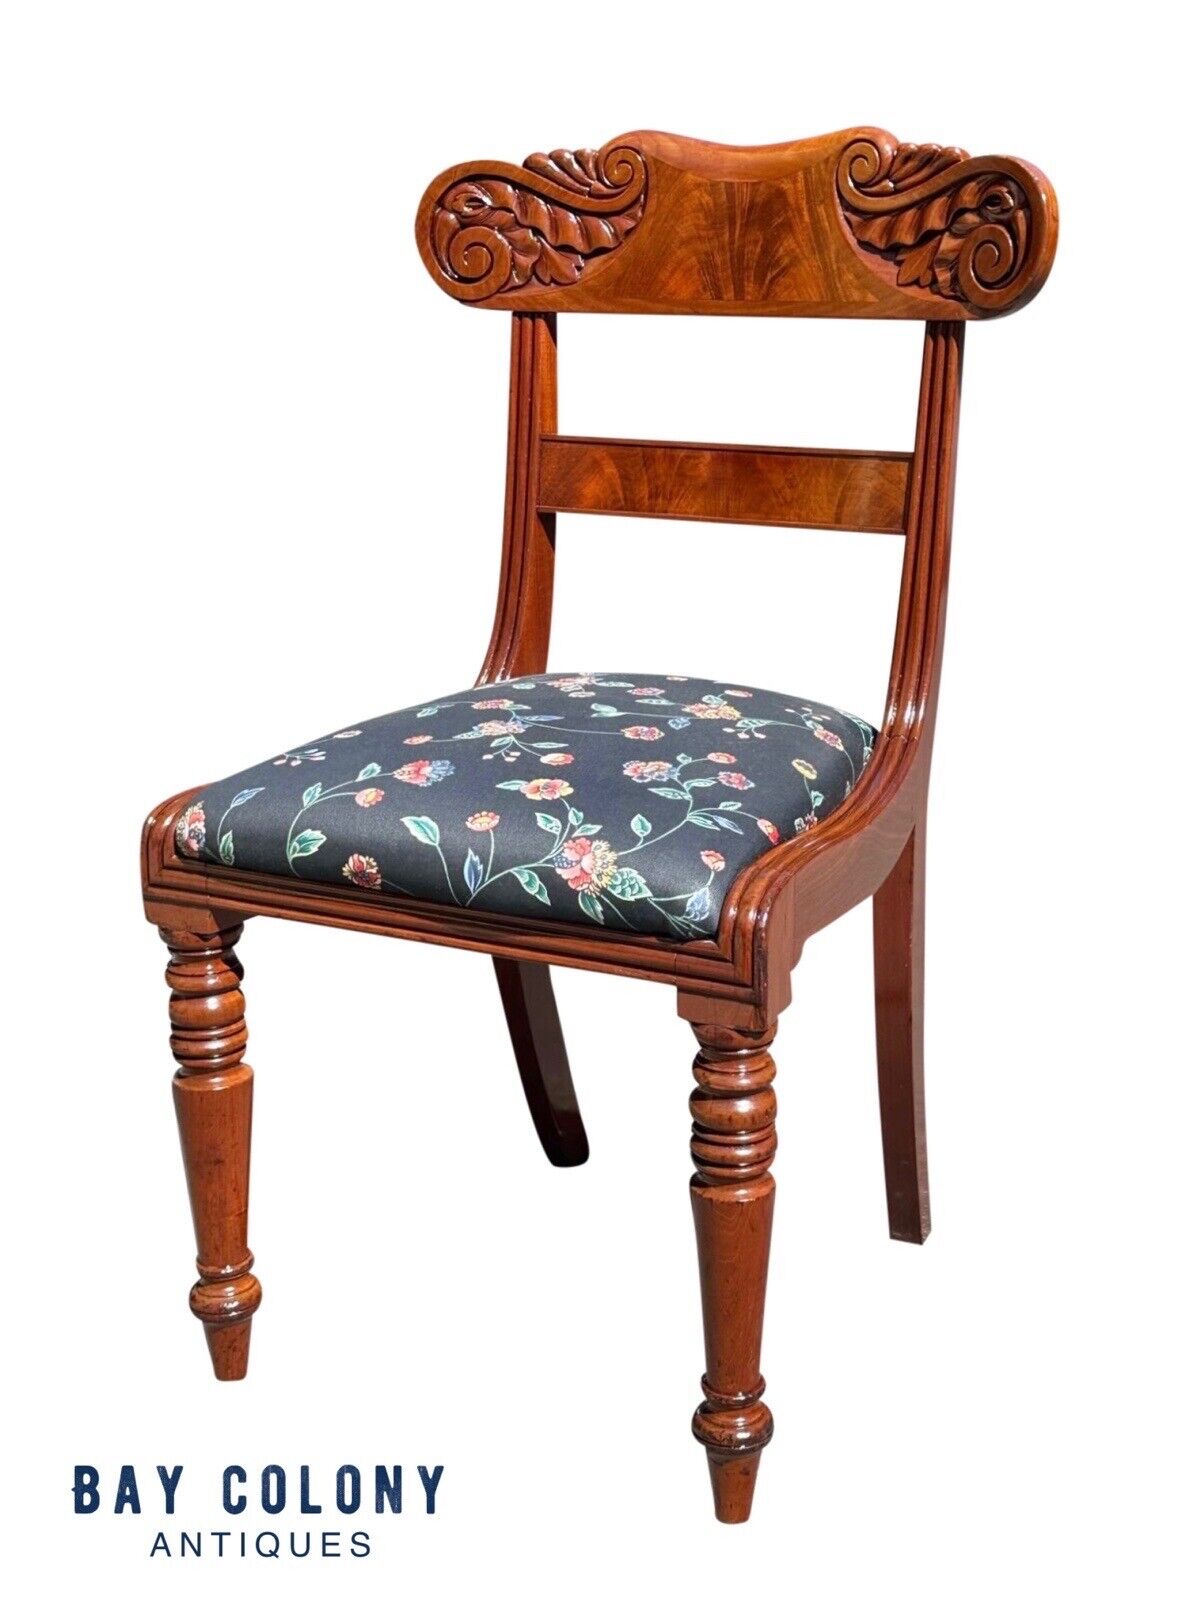 19th Century Antique Classical Mahogany Side Chair With Elaborately Carved Crest